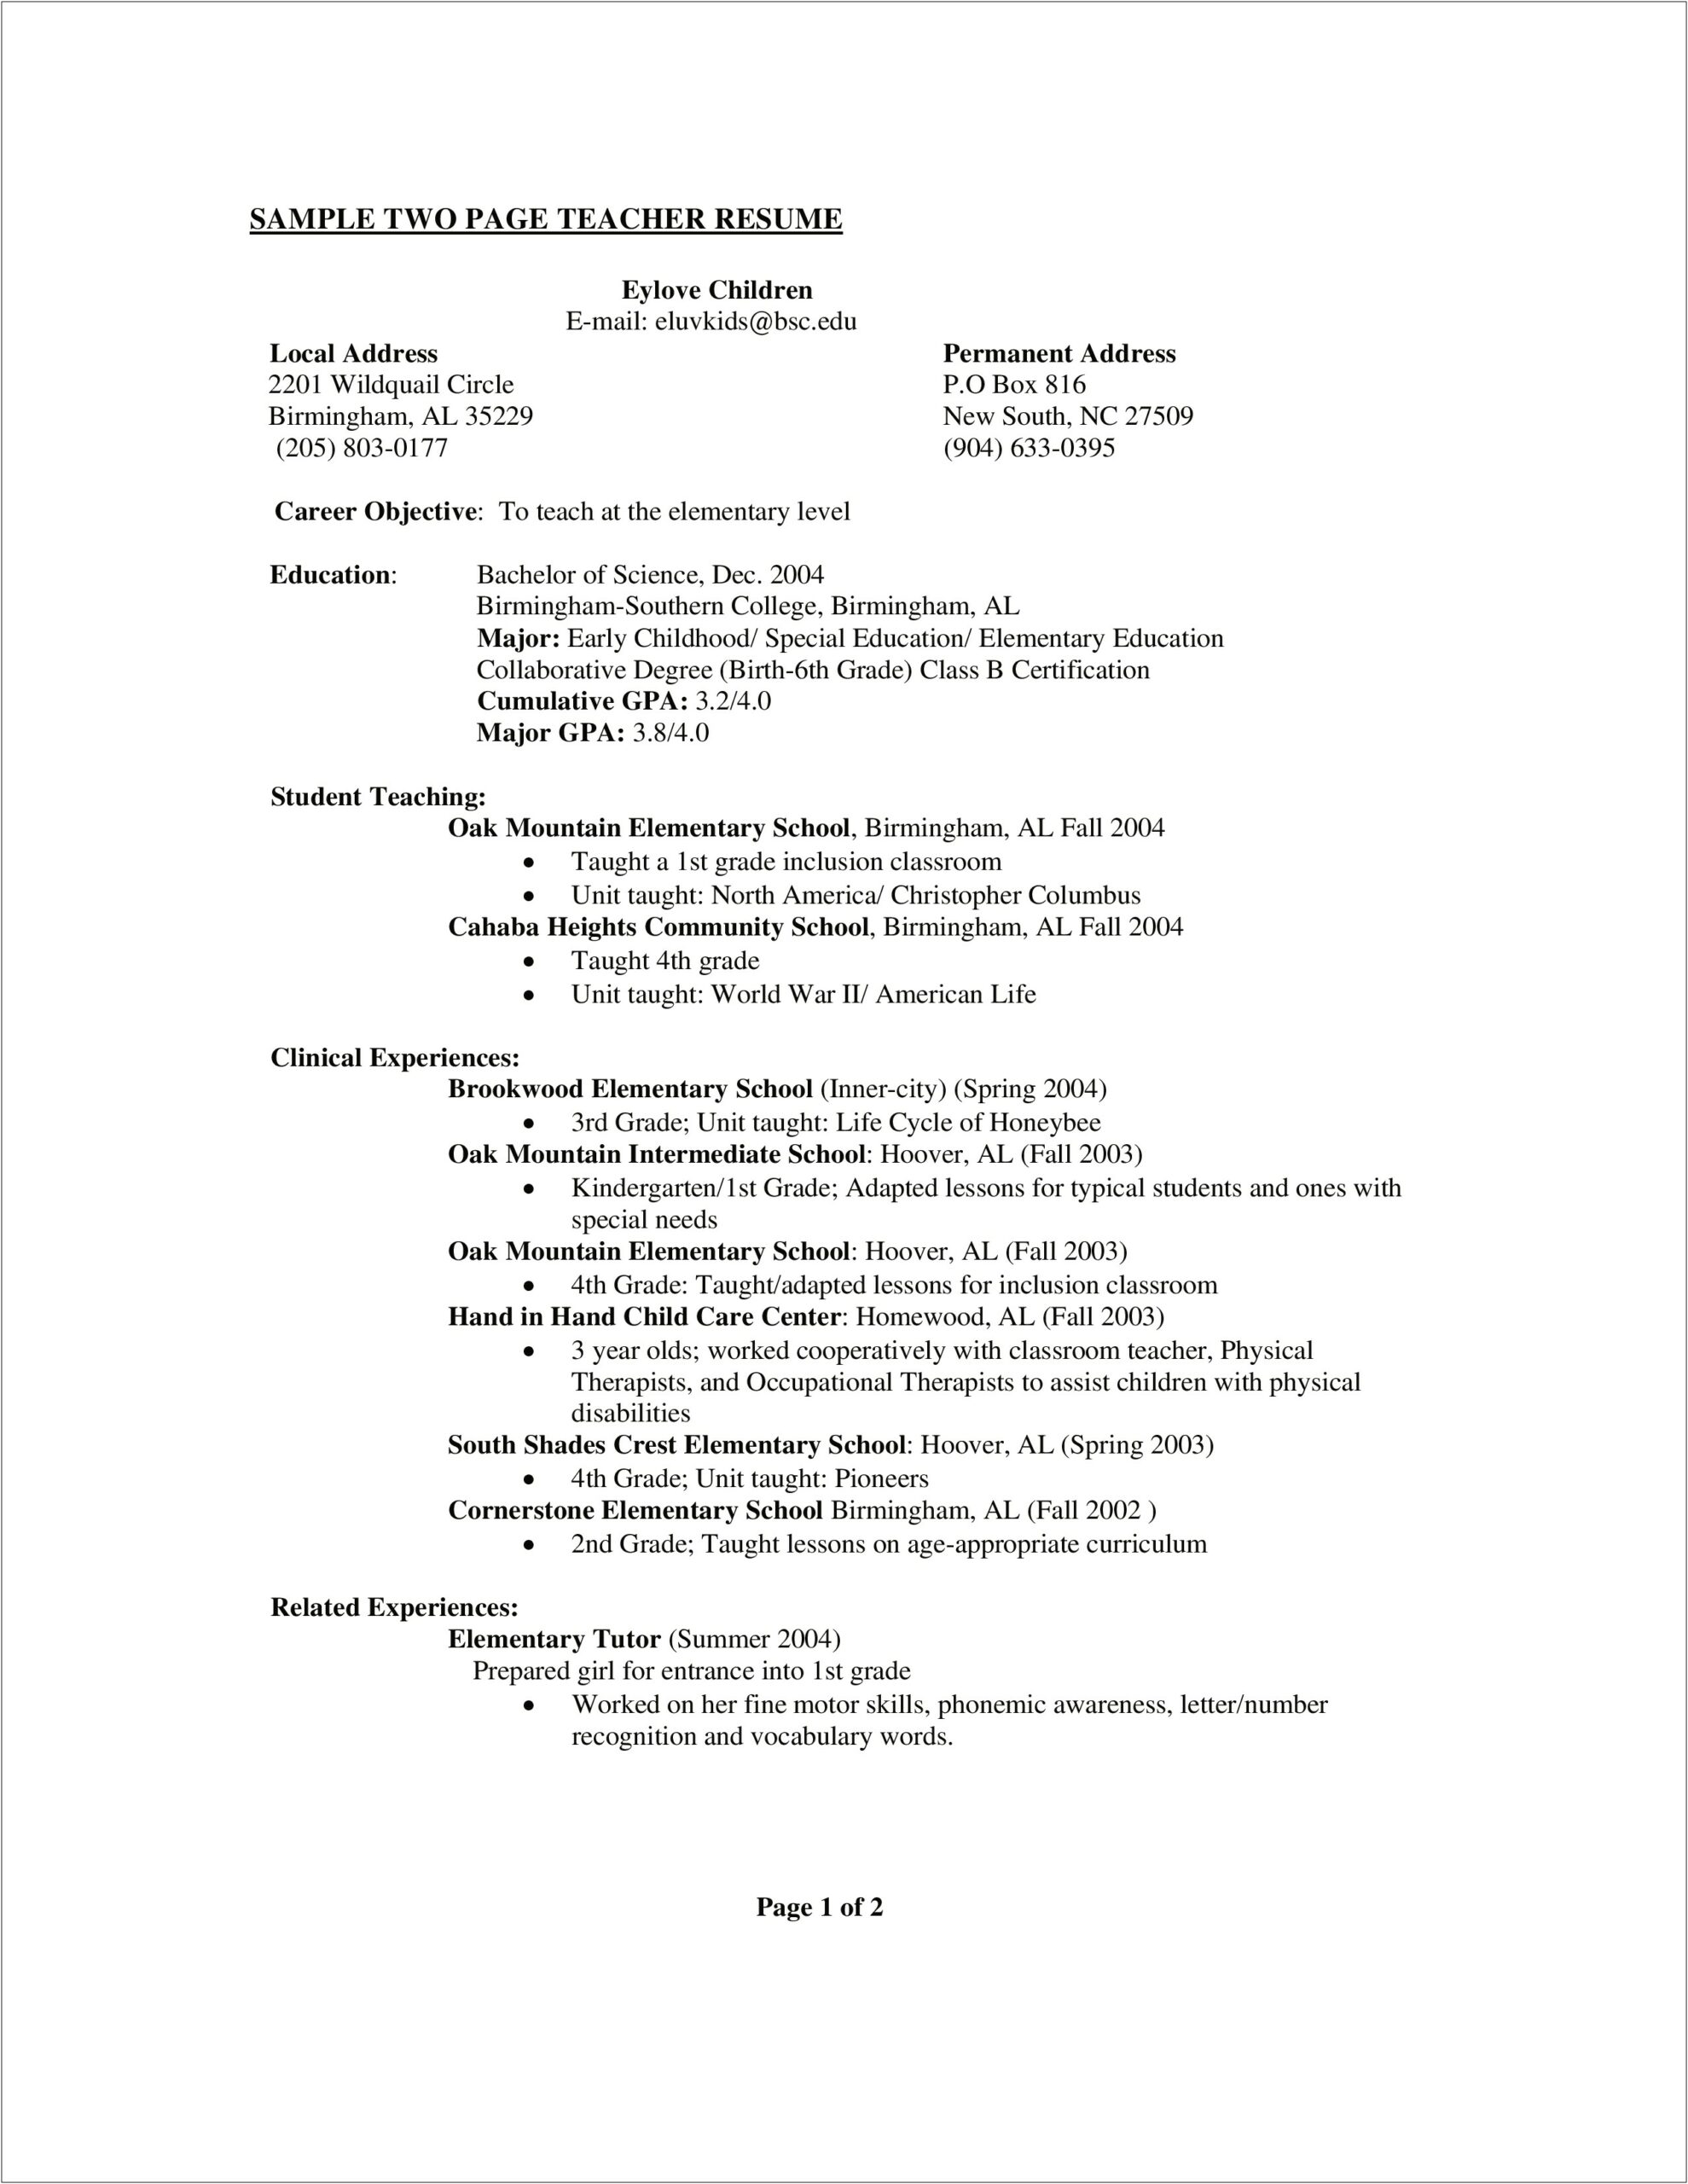 Sample Resume For Early Childhood Special Education Teachers